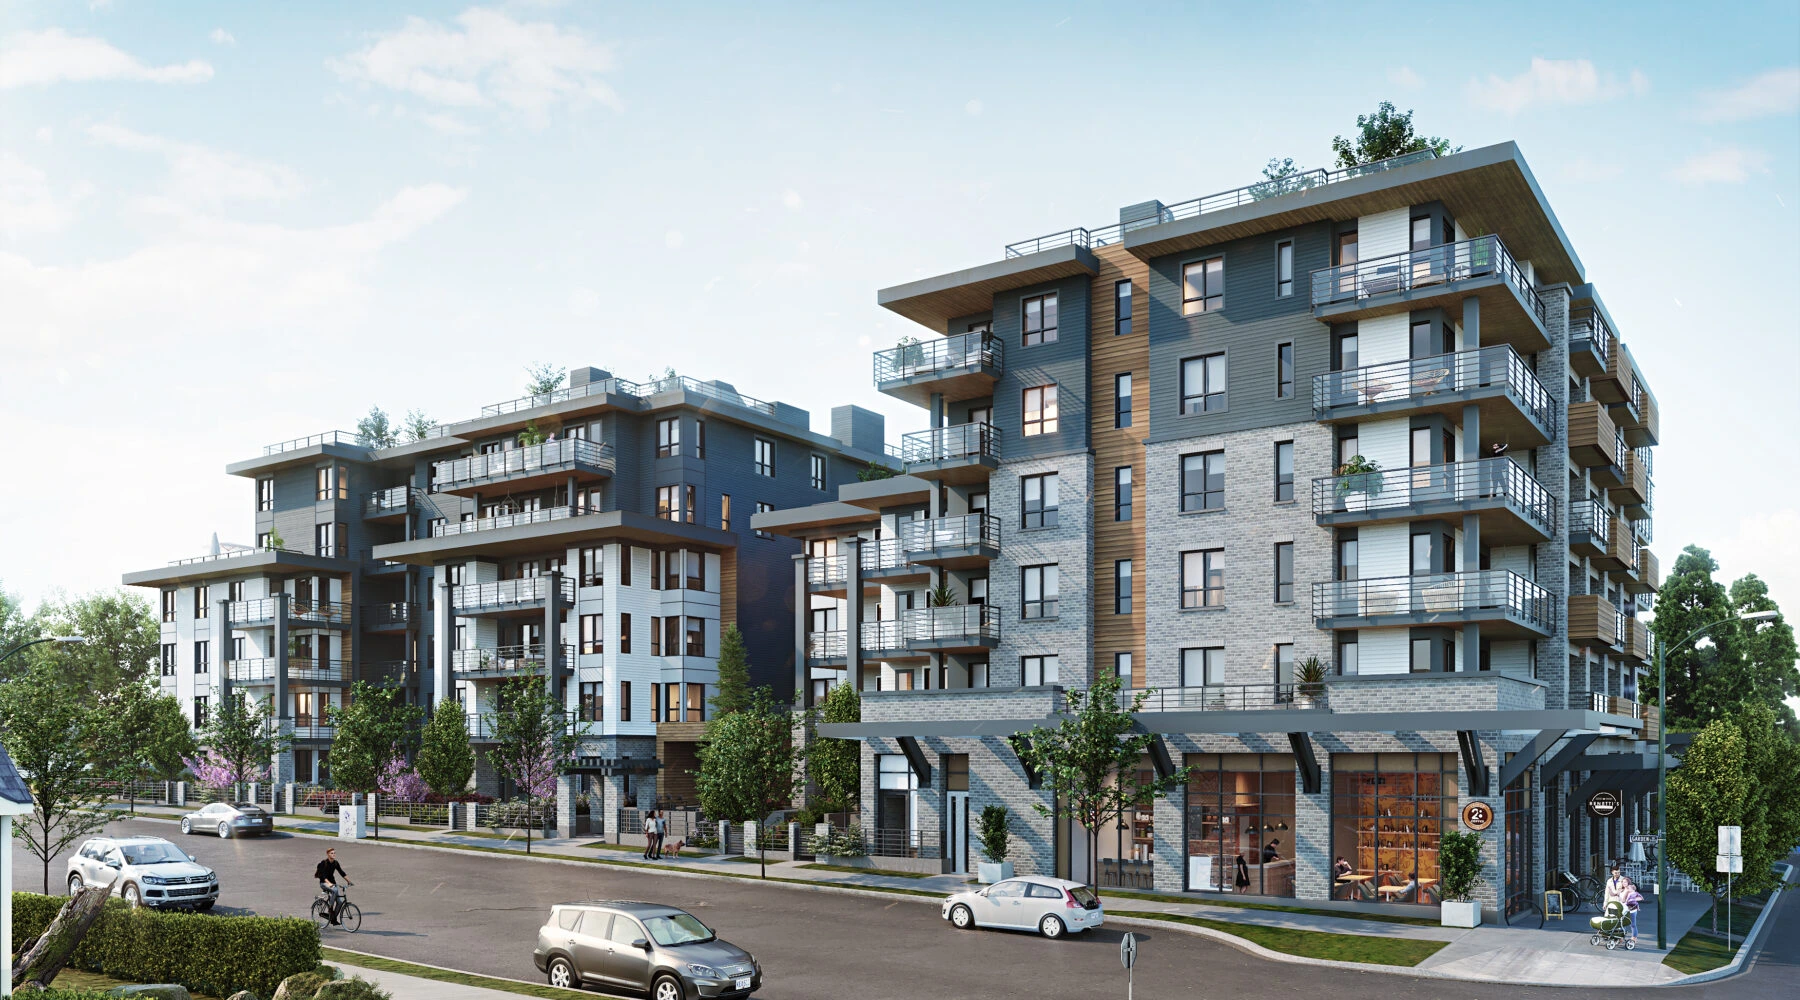 Grafia by Porte Homes is a new East Vancouver condo development of 122 studio to 3-bedroom homes.